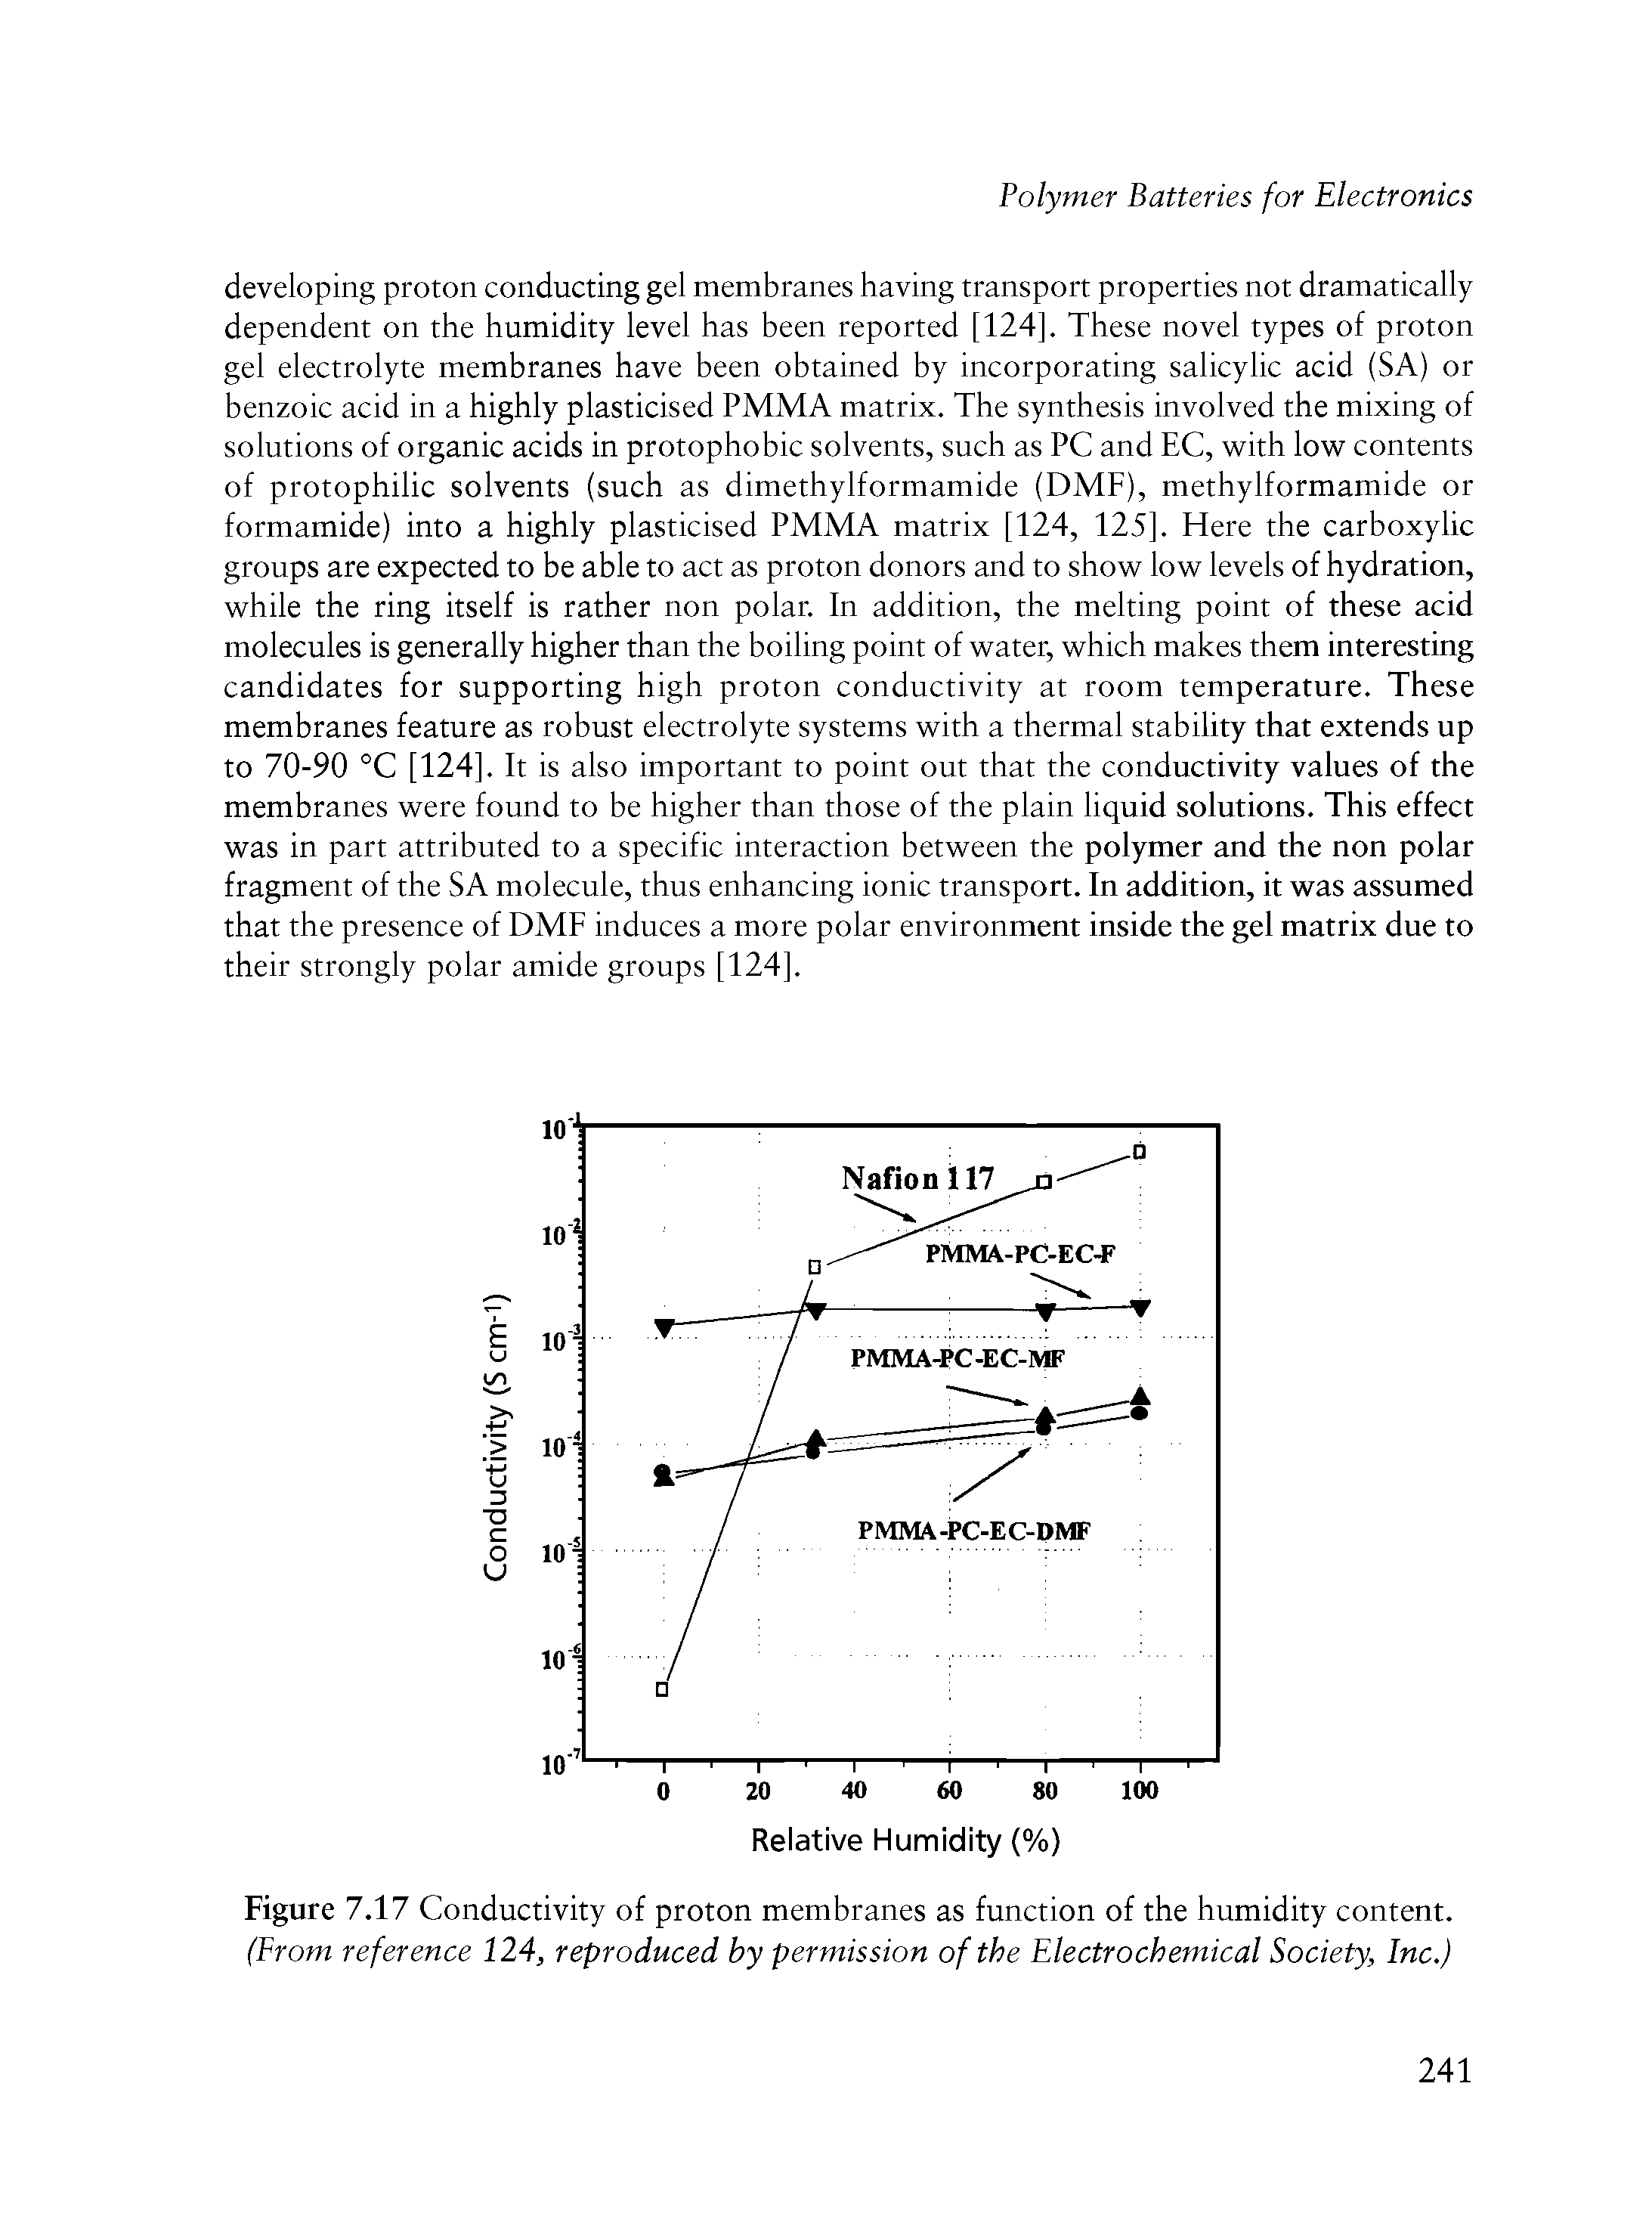 Figure 7.17 Conductivity of proton membranes as function of the humidity content. (Prom reference 124, reproduced by permission of the Electrochemical Society, Inc.)...